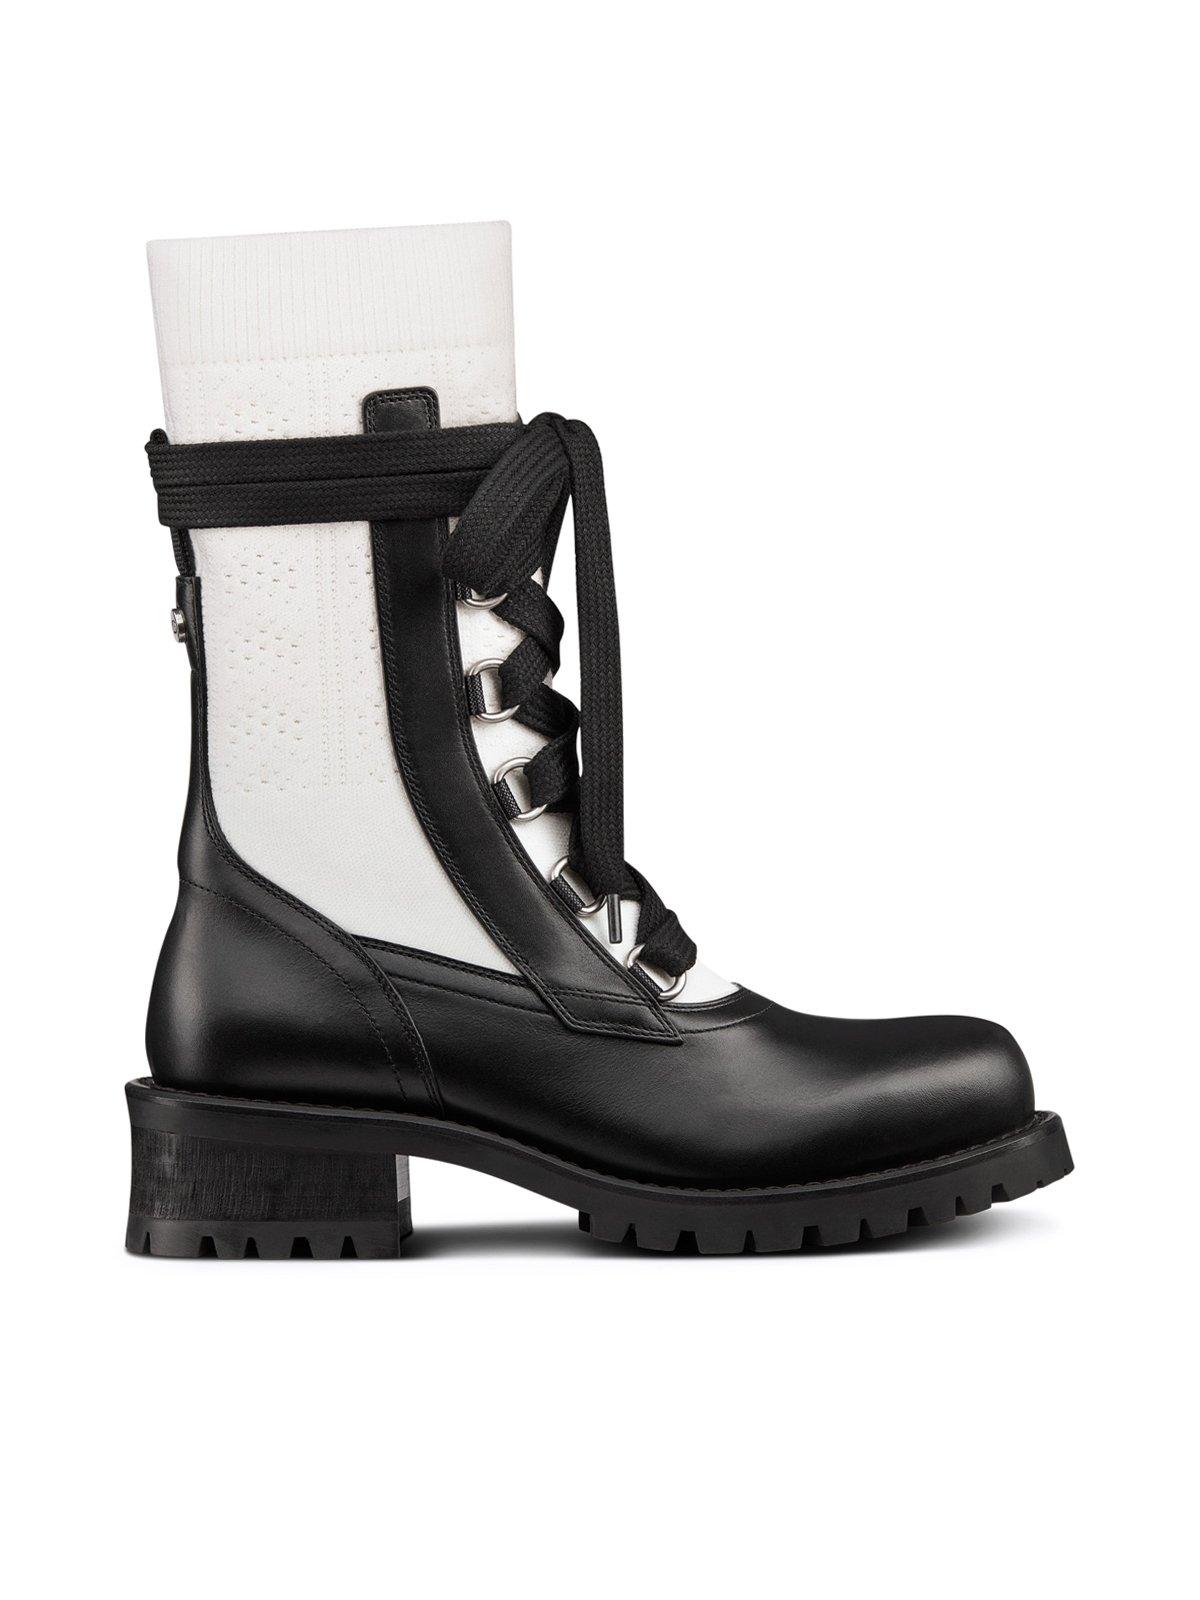 Dior Leather Diorland Lace-up Boot in Black | Lyst